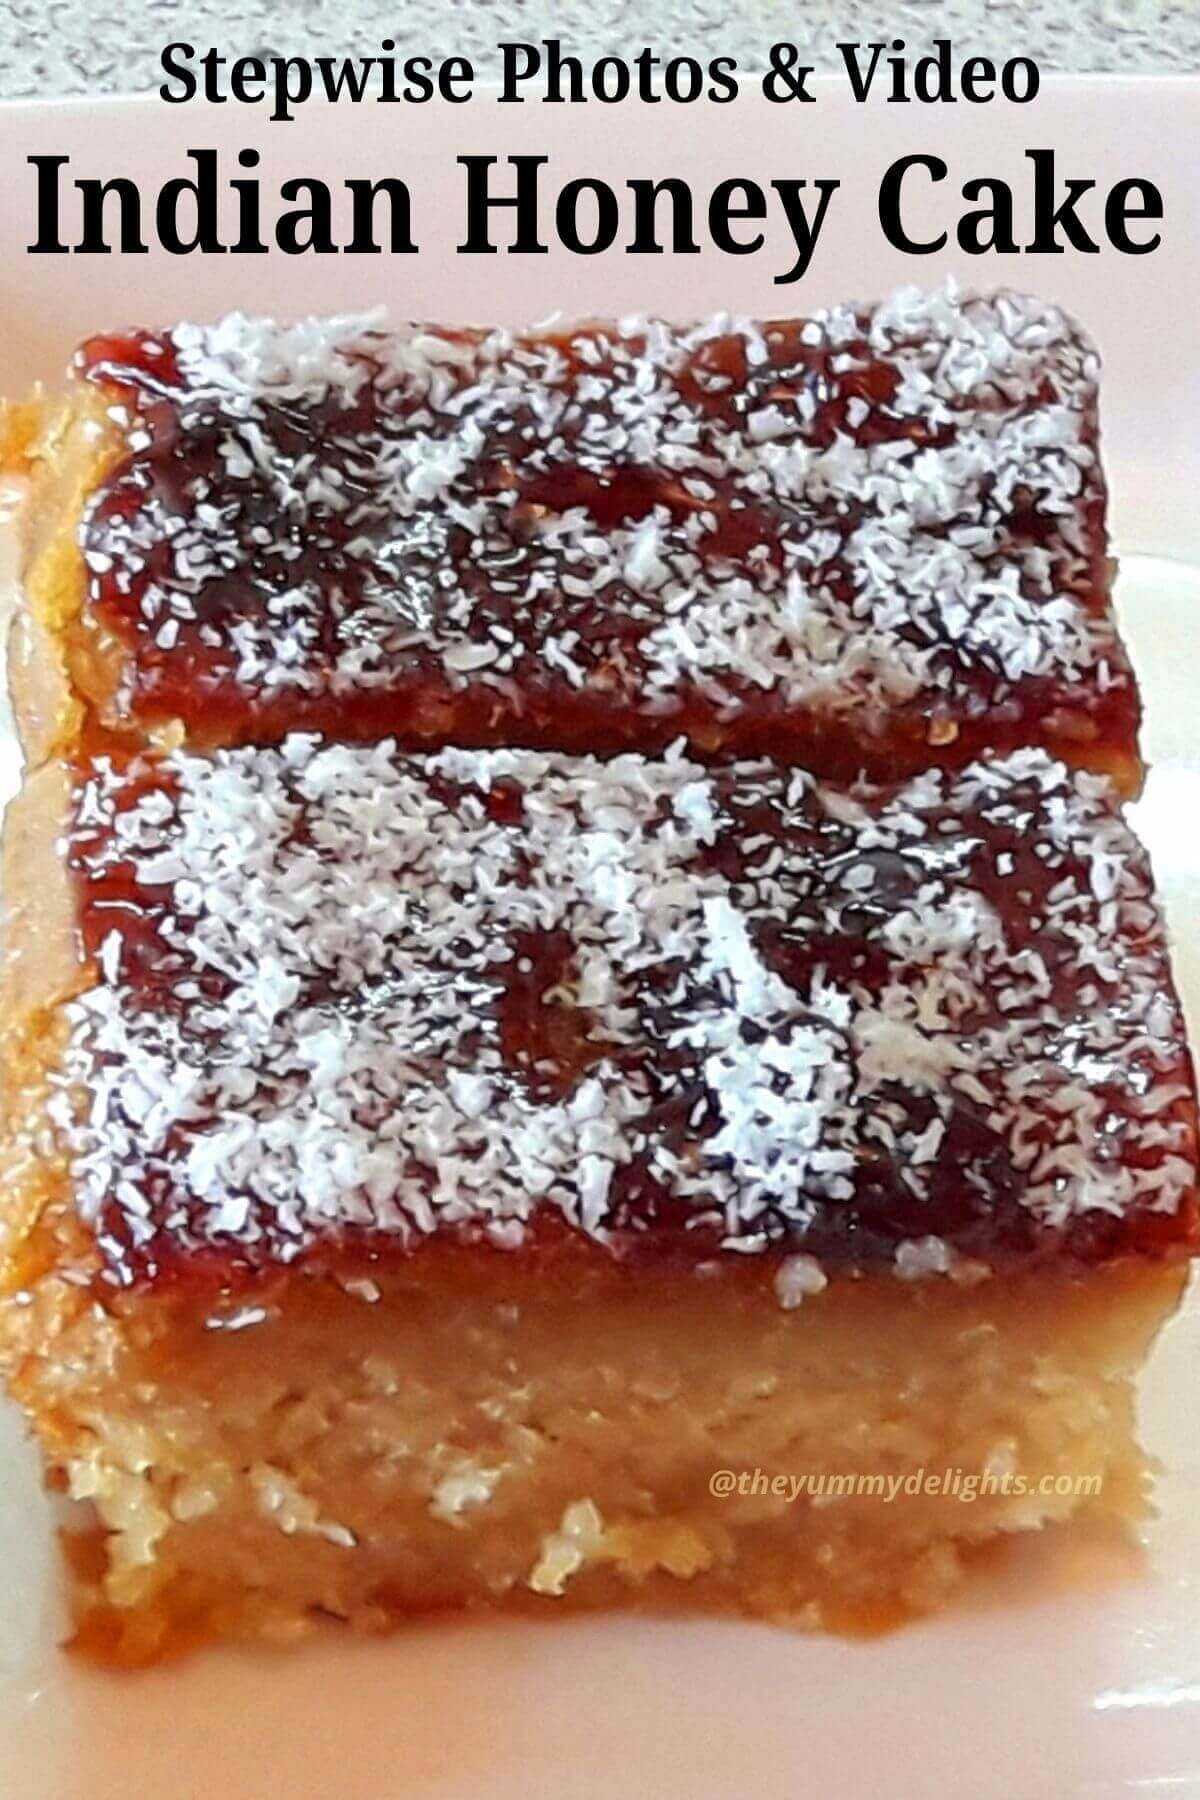 close-up of Indian honey cake placed on a white plate.